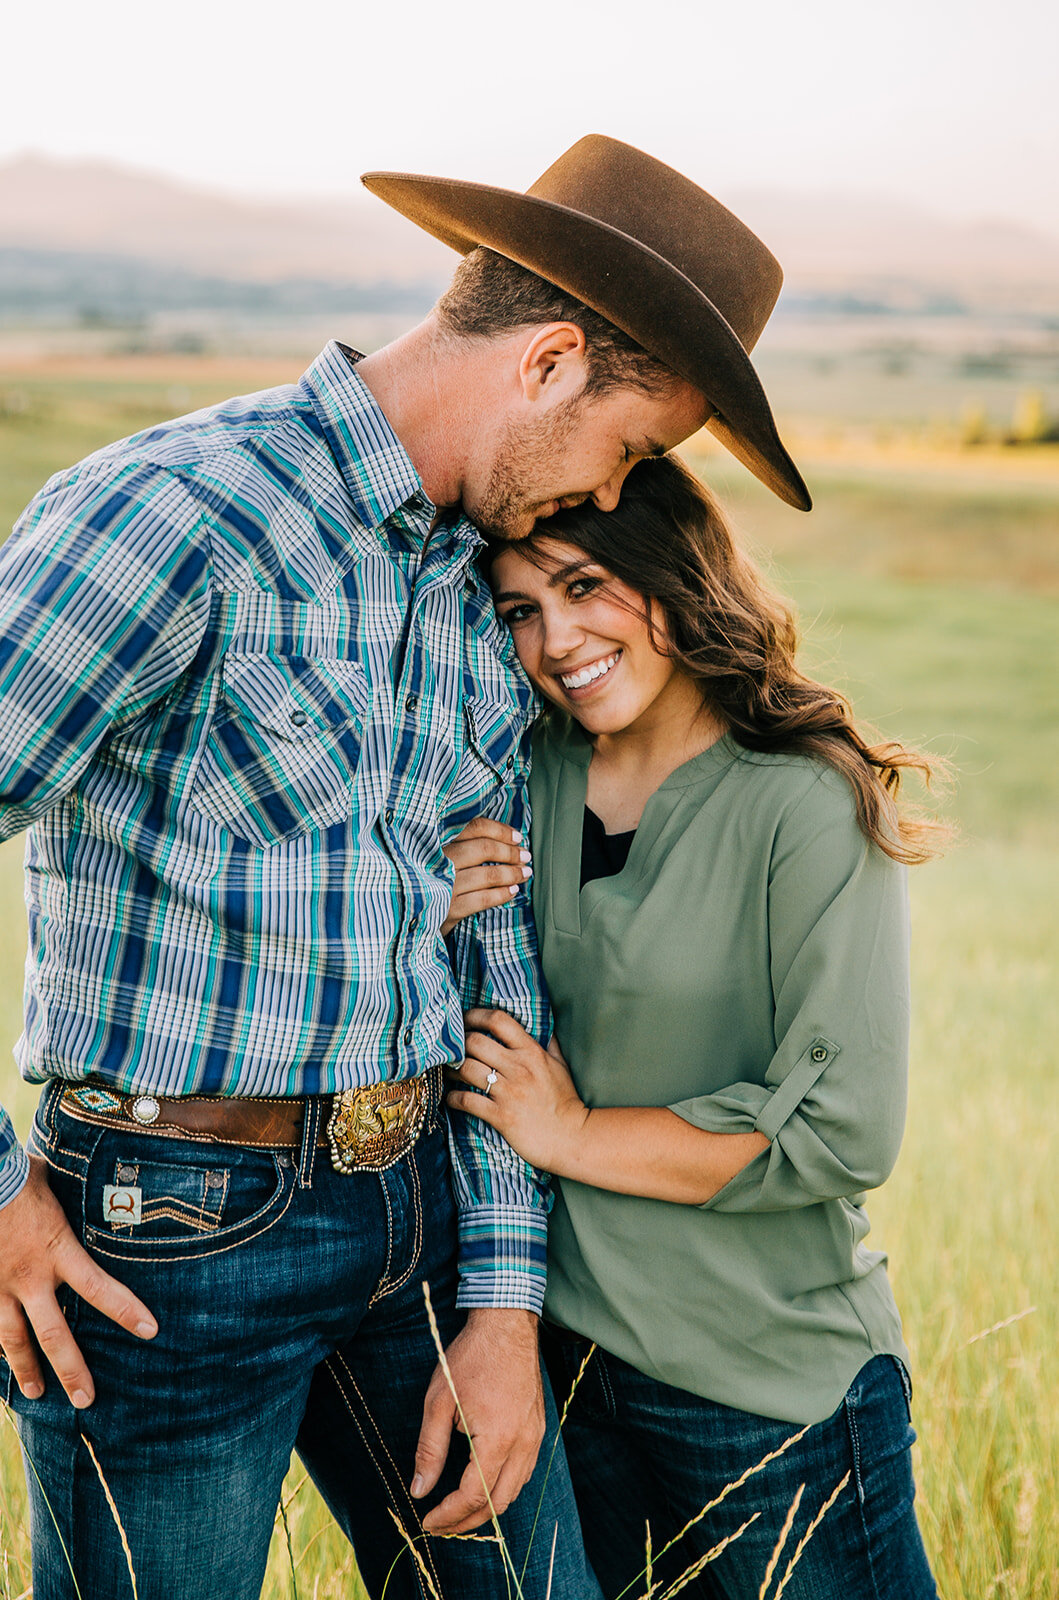  country lovers cowboy outfit inspo forehead to forehead intimate posing couple posing ideas engagement session summer time green grass blue and green outfit ideas girl looking at photographer in love couple swing dancing partners future farmer hat s